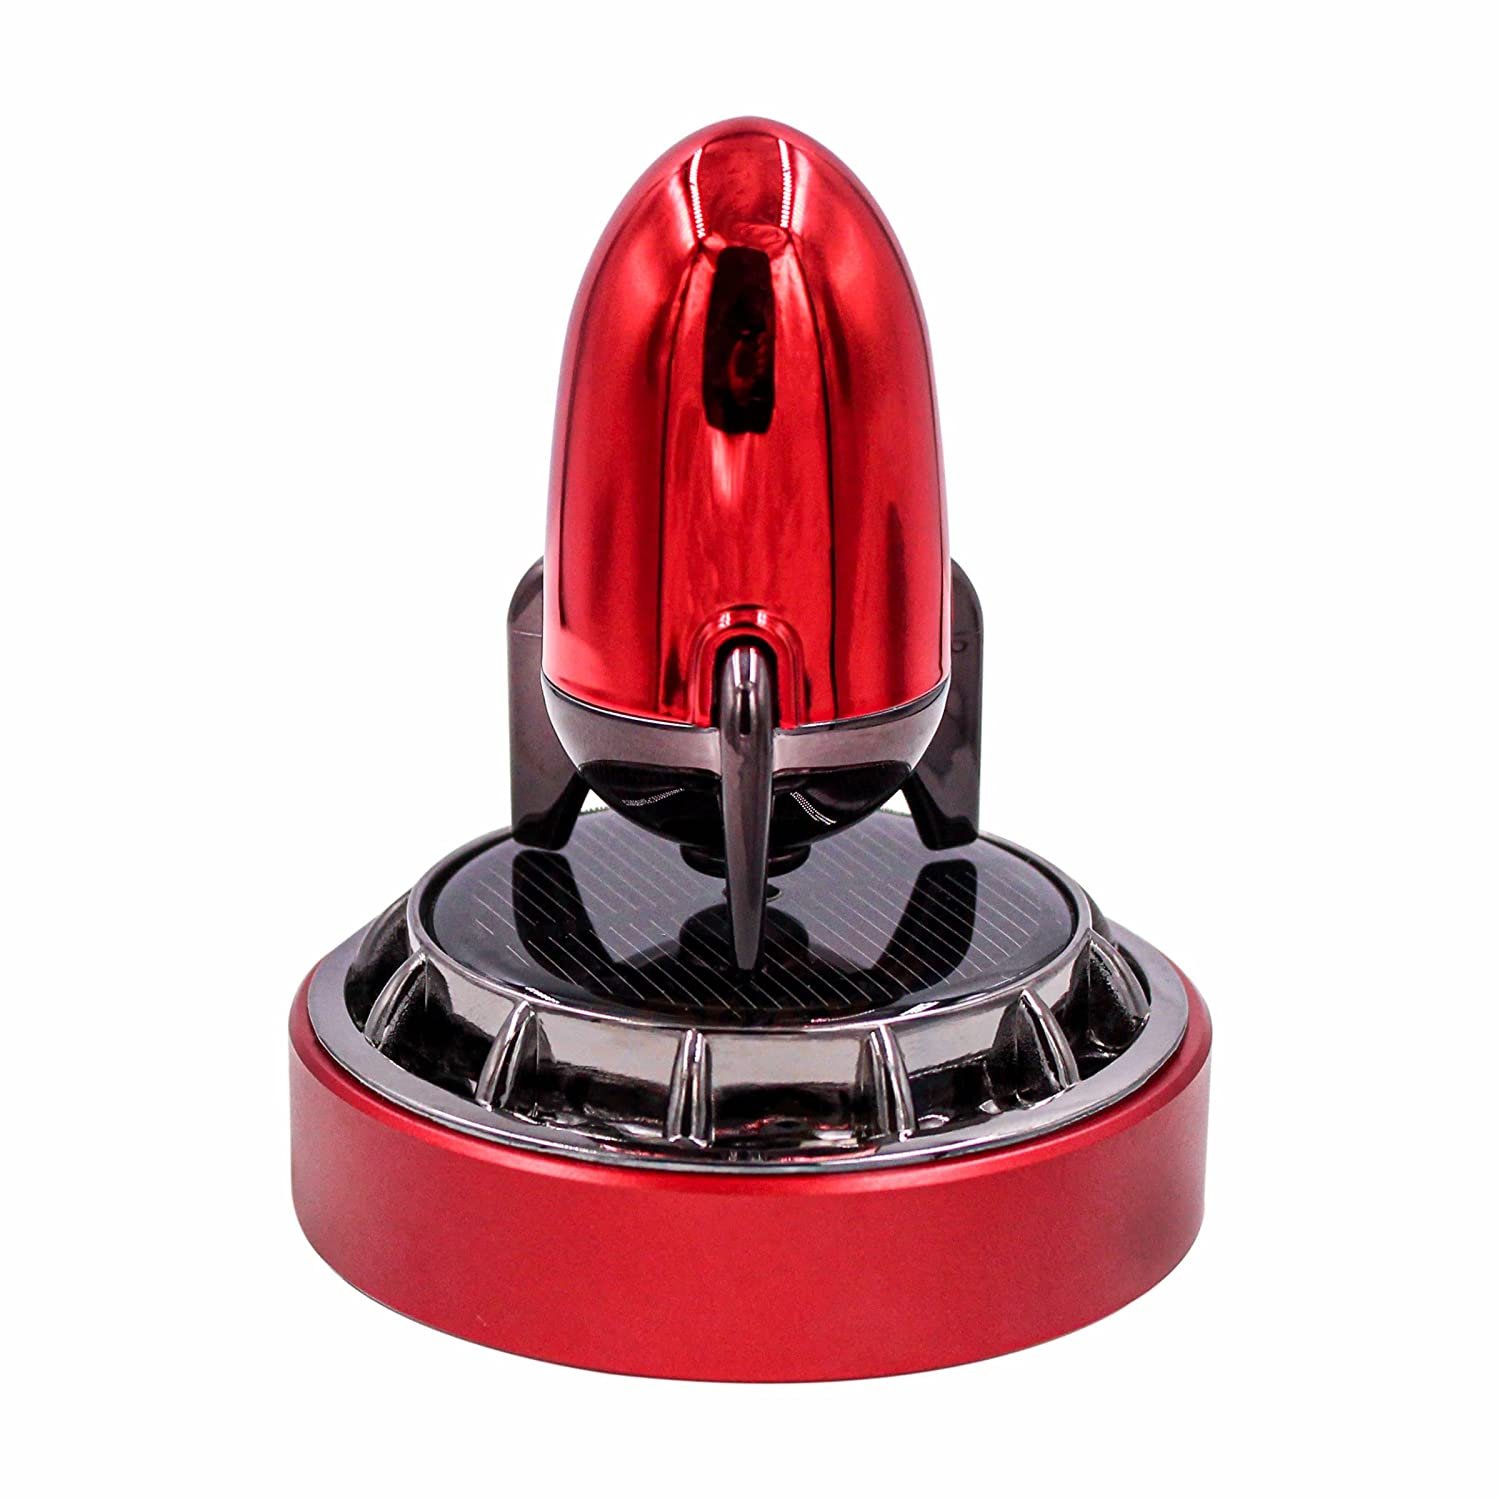 Car Aroma Diffuser Air Freshener Perfume Solar Power Dashboard Rocket style Decoration With Perfume(Red) Image